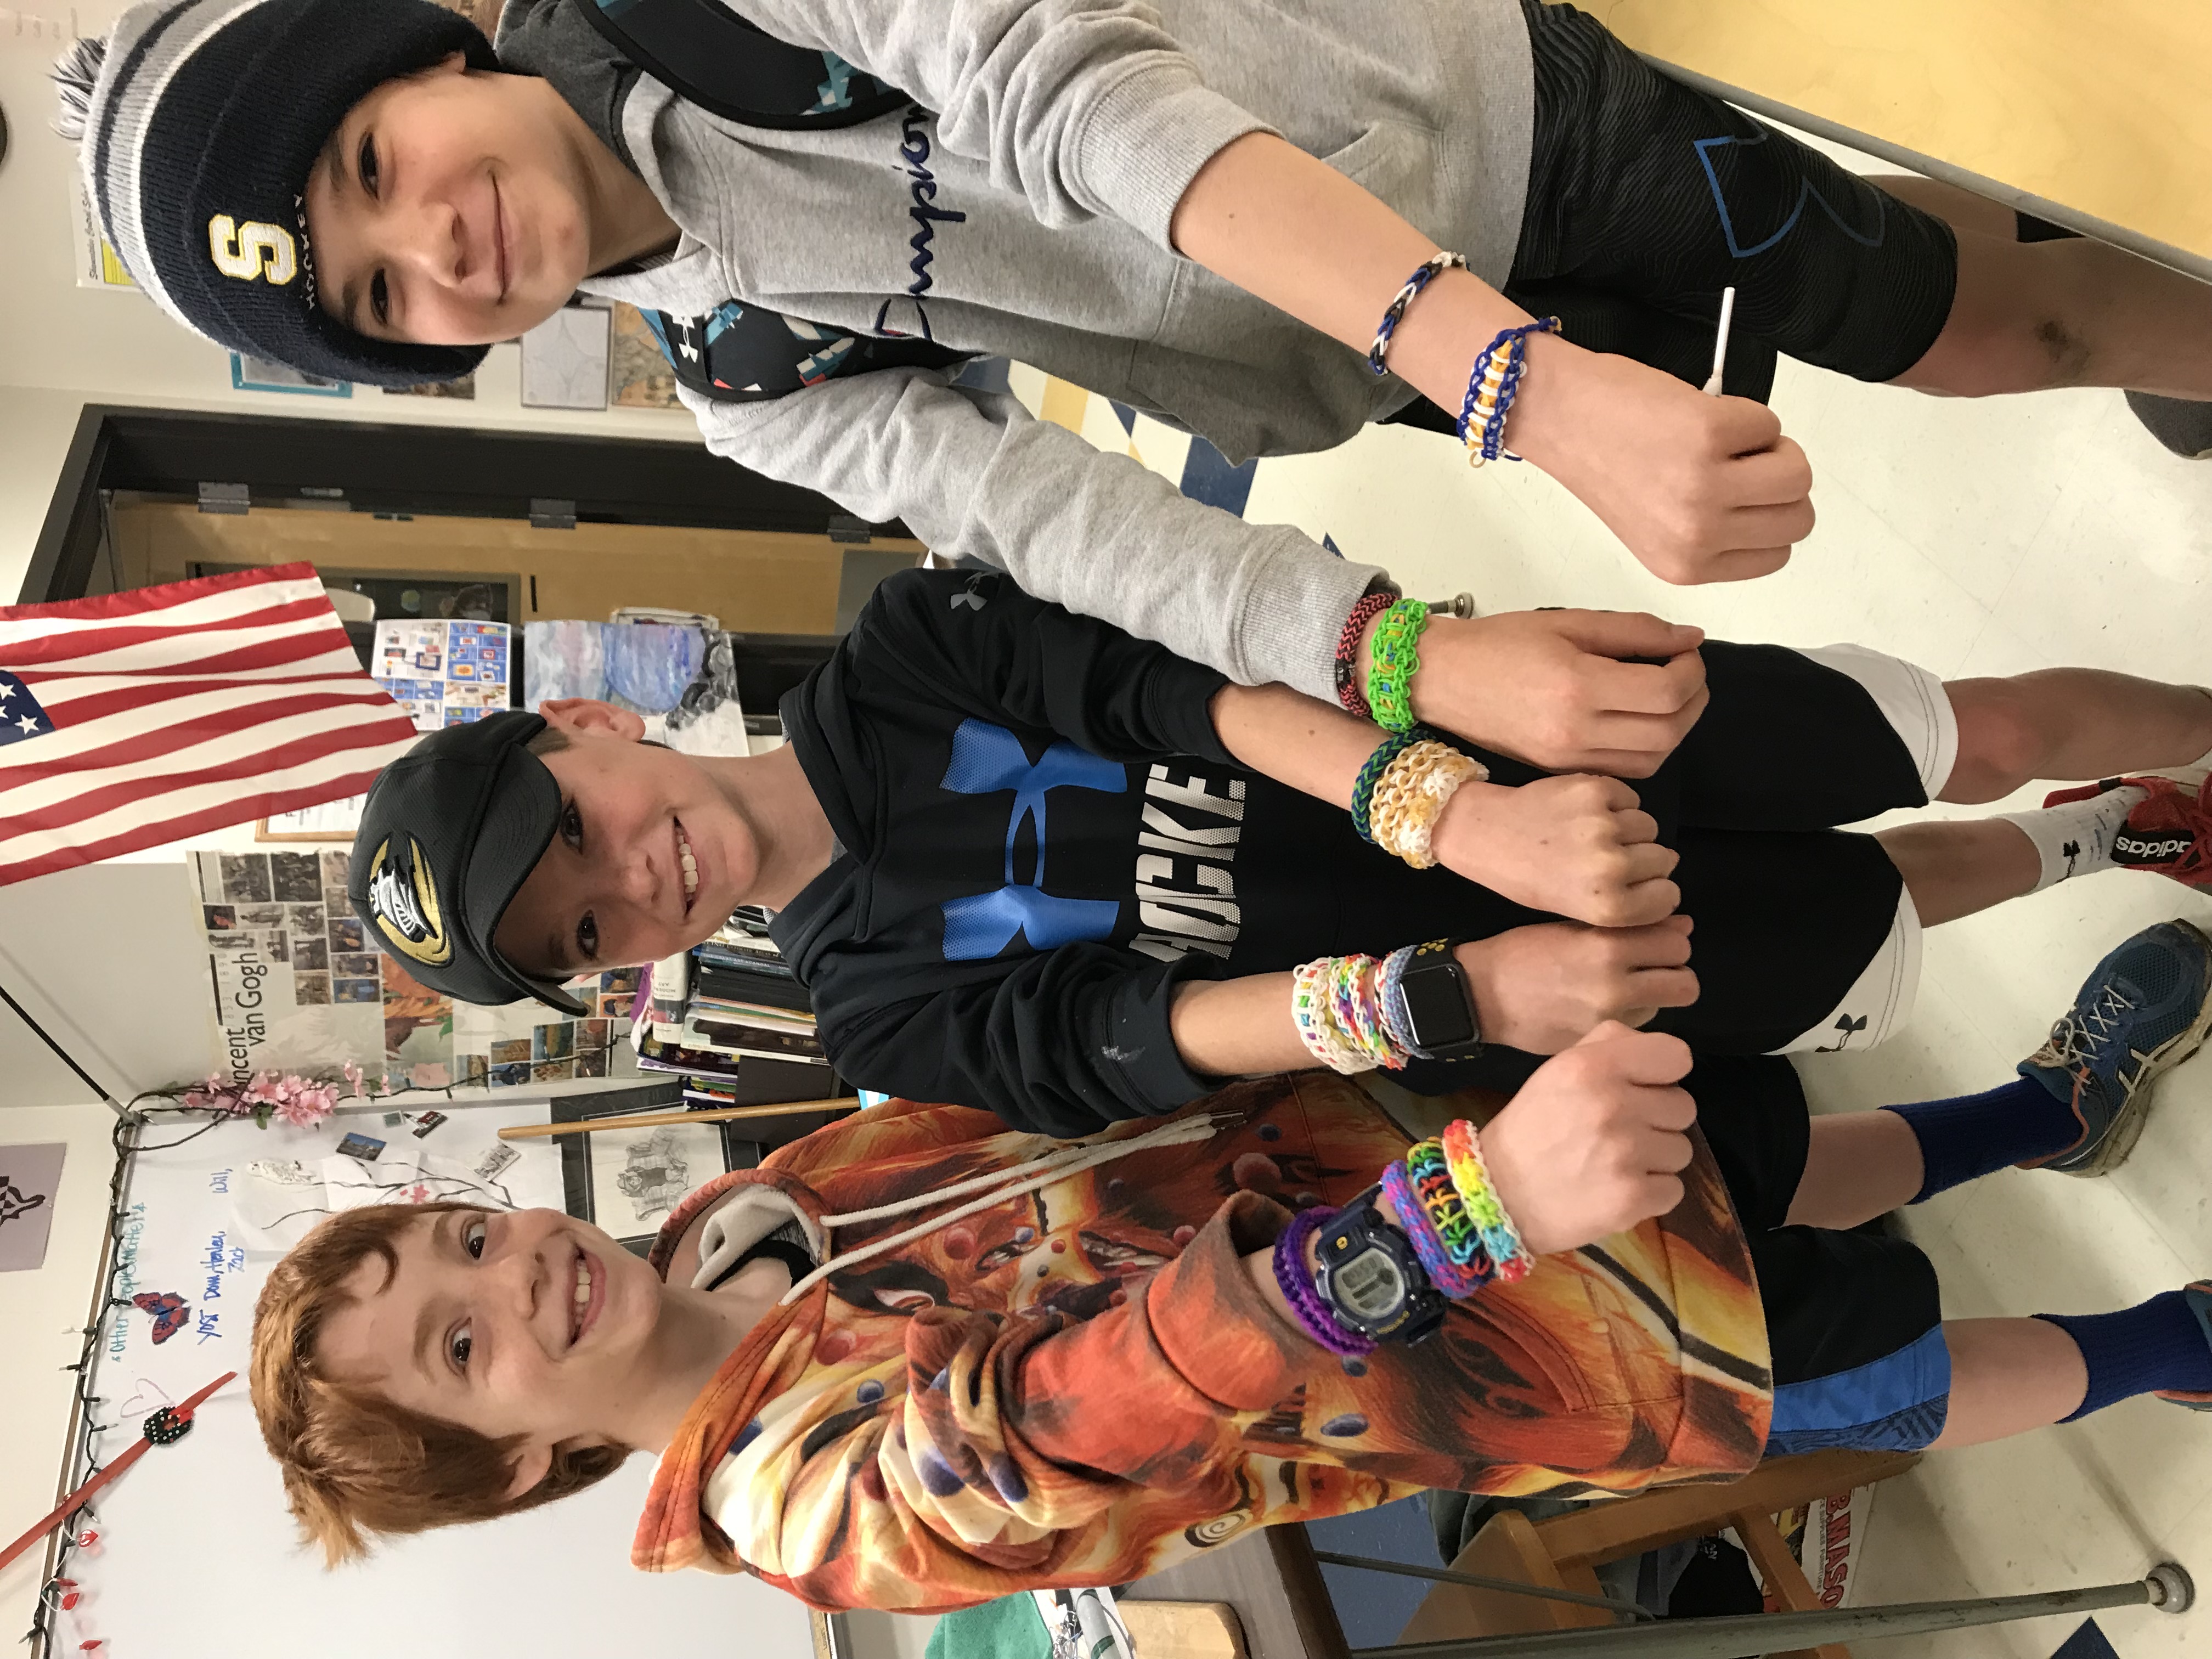 Isaac Franks, William Clancy and their friend Leo Lang show off Monster Bands